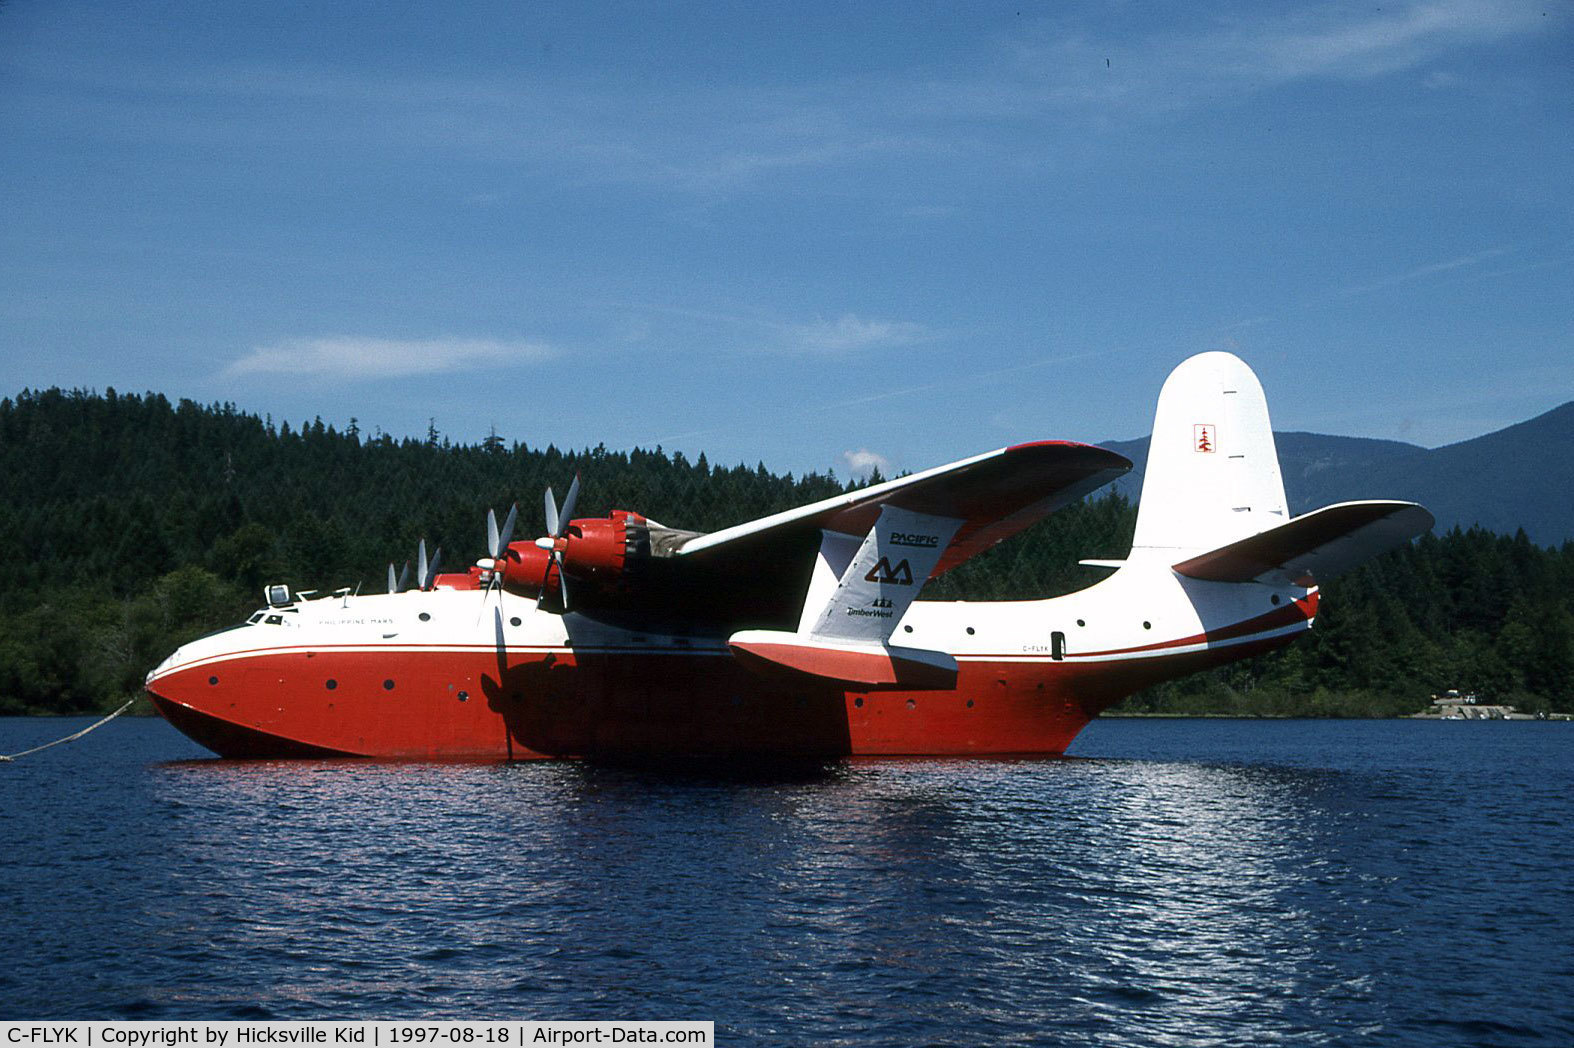 C-FLYK, 1945 Martin JRM-3 Mars C/N 76820, Photo taken 18 August 1997 at Sprout Lake, Vancouver Island, BC, Canada